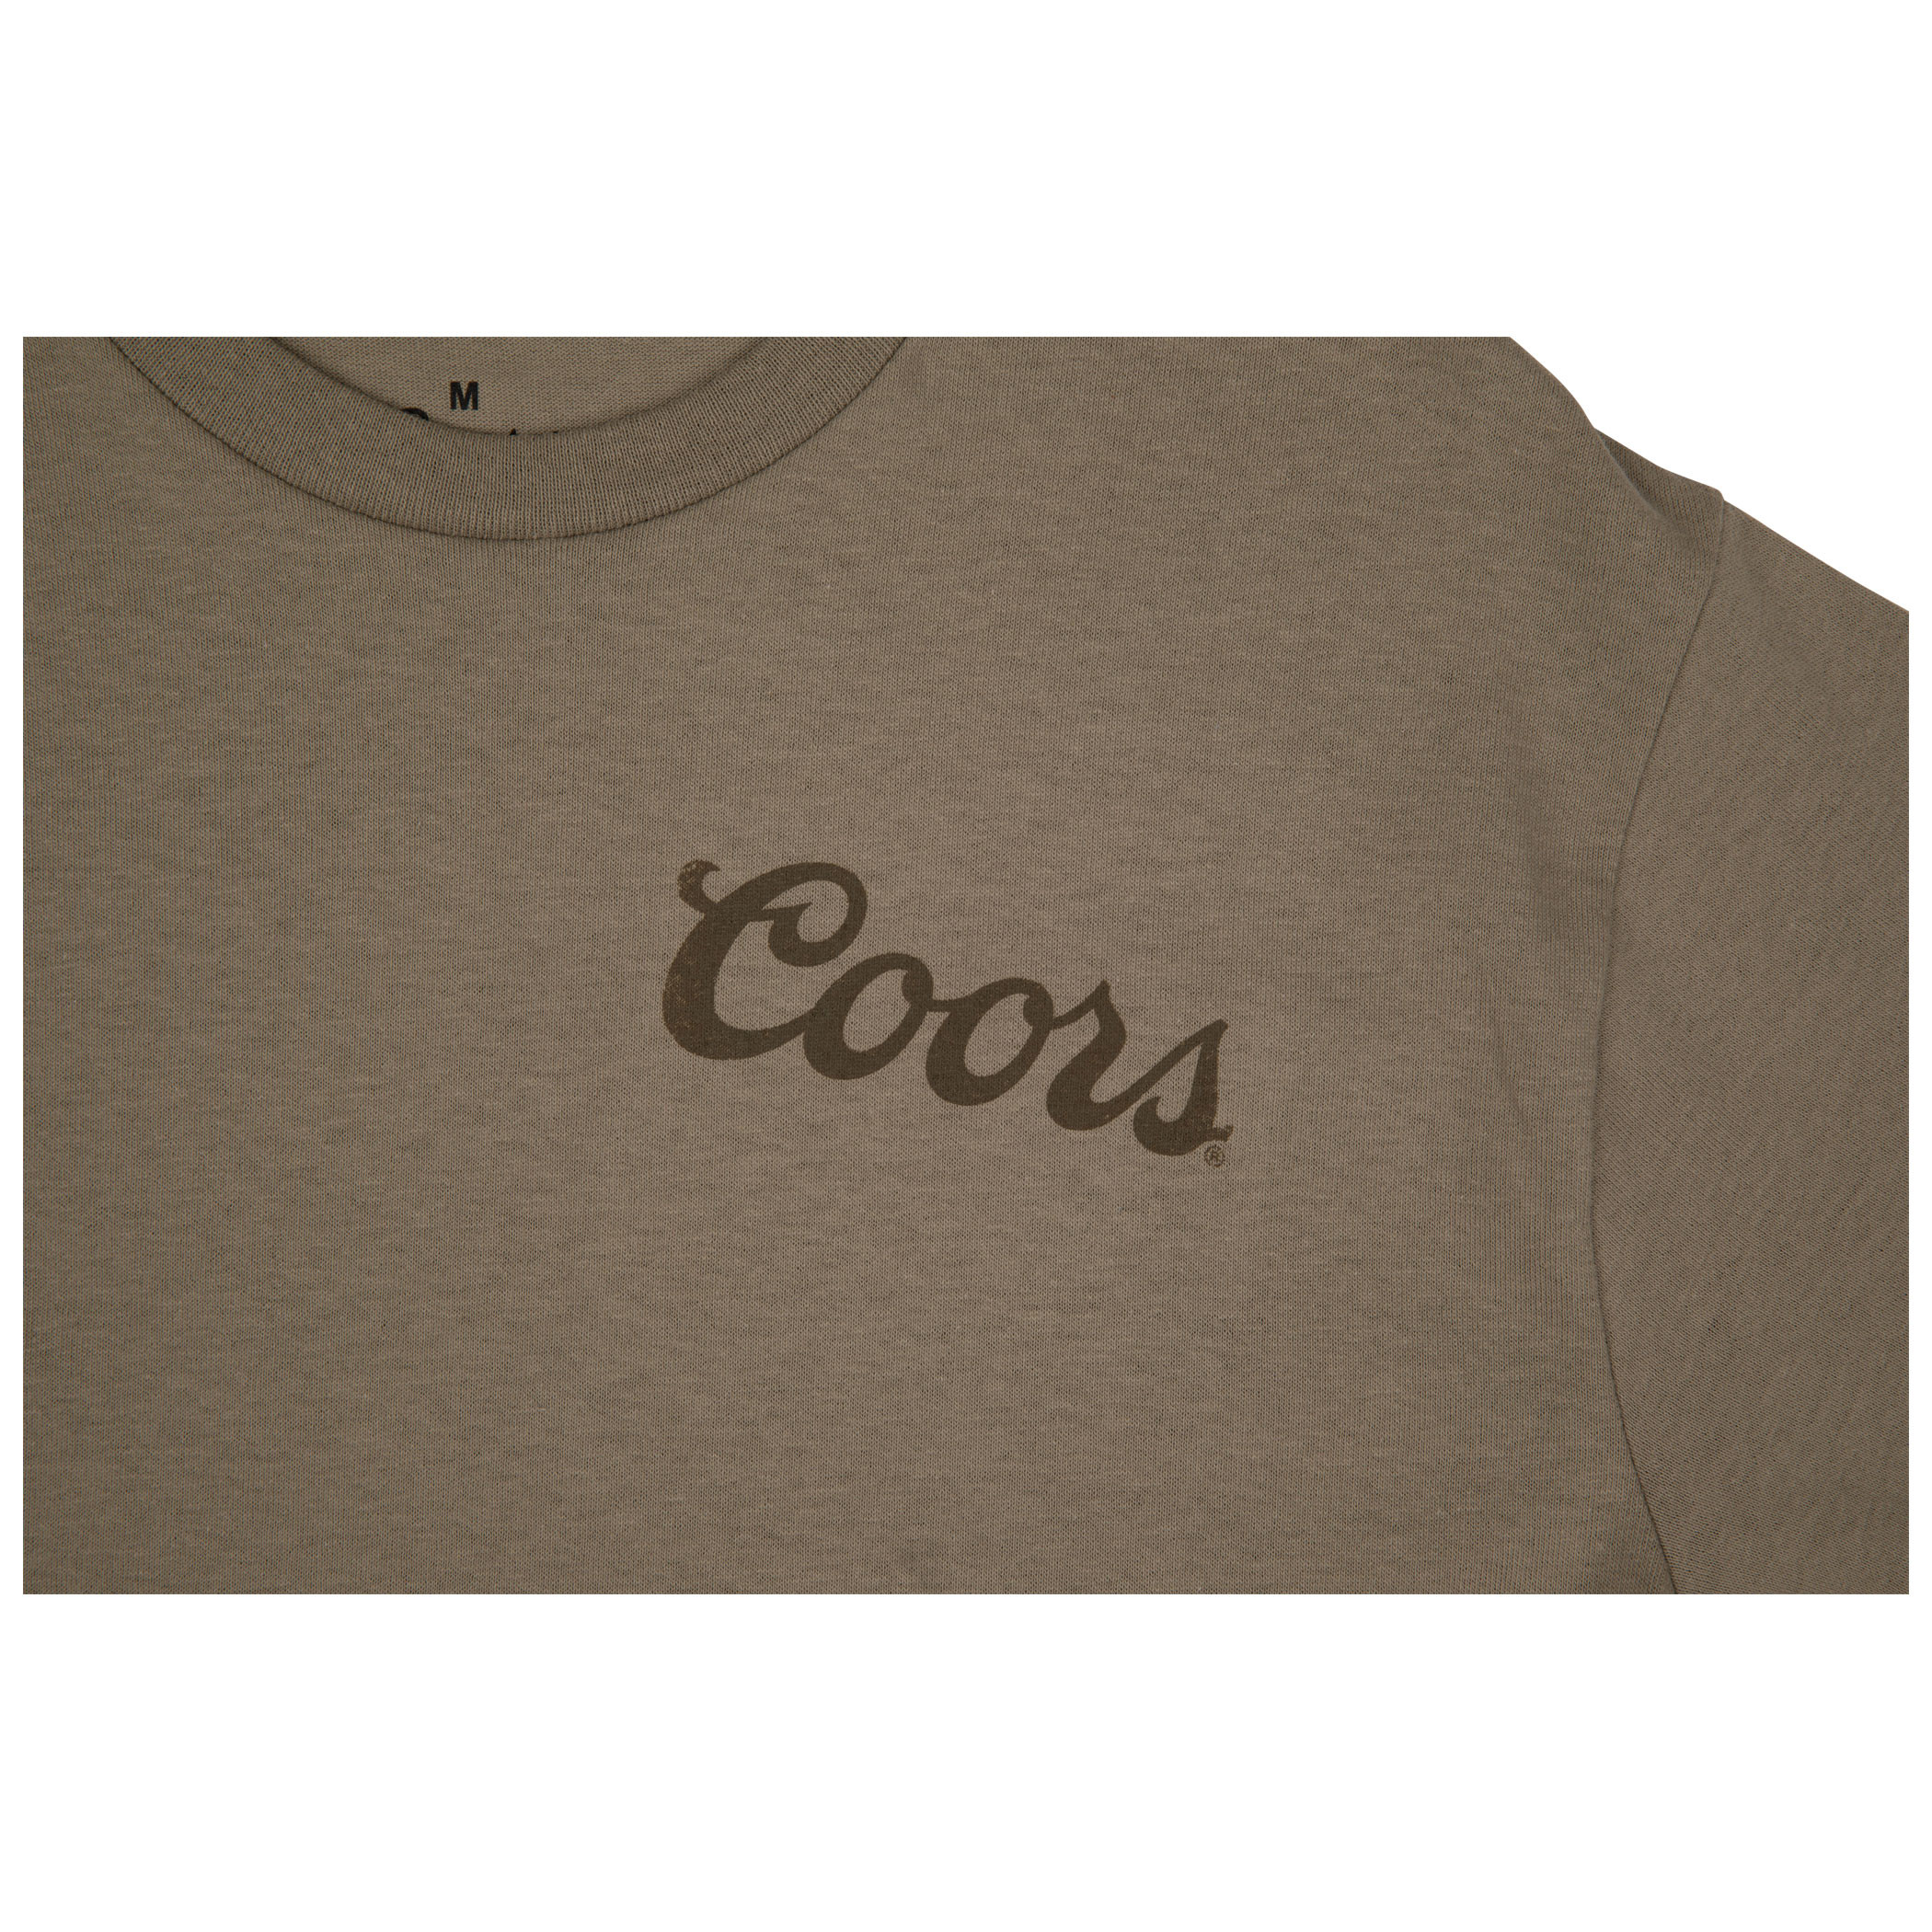 Coors Banquet Rodeo Bull Rider Front and Back Print T-Shirt